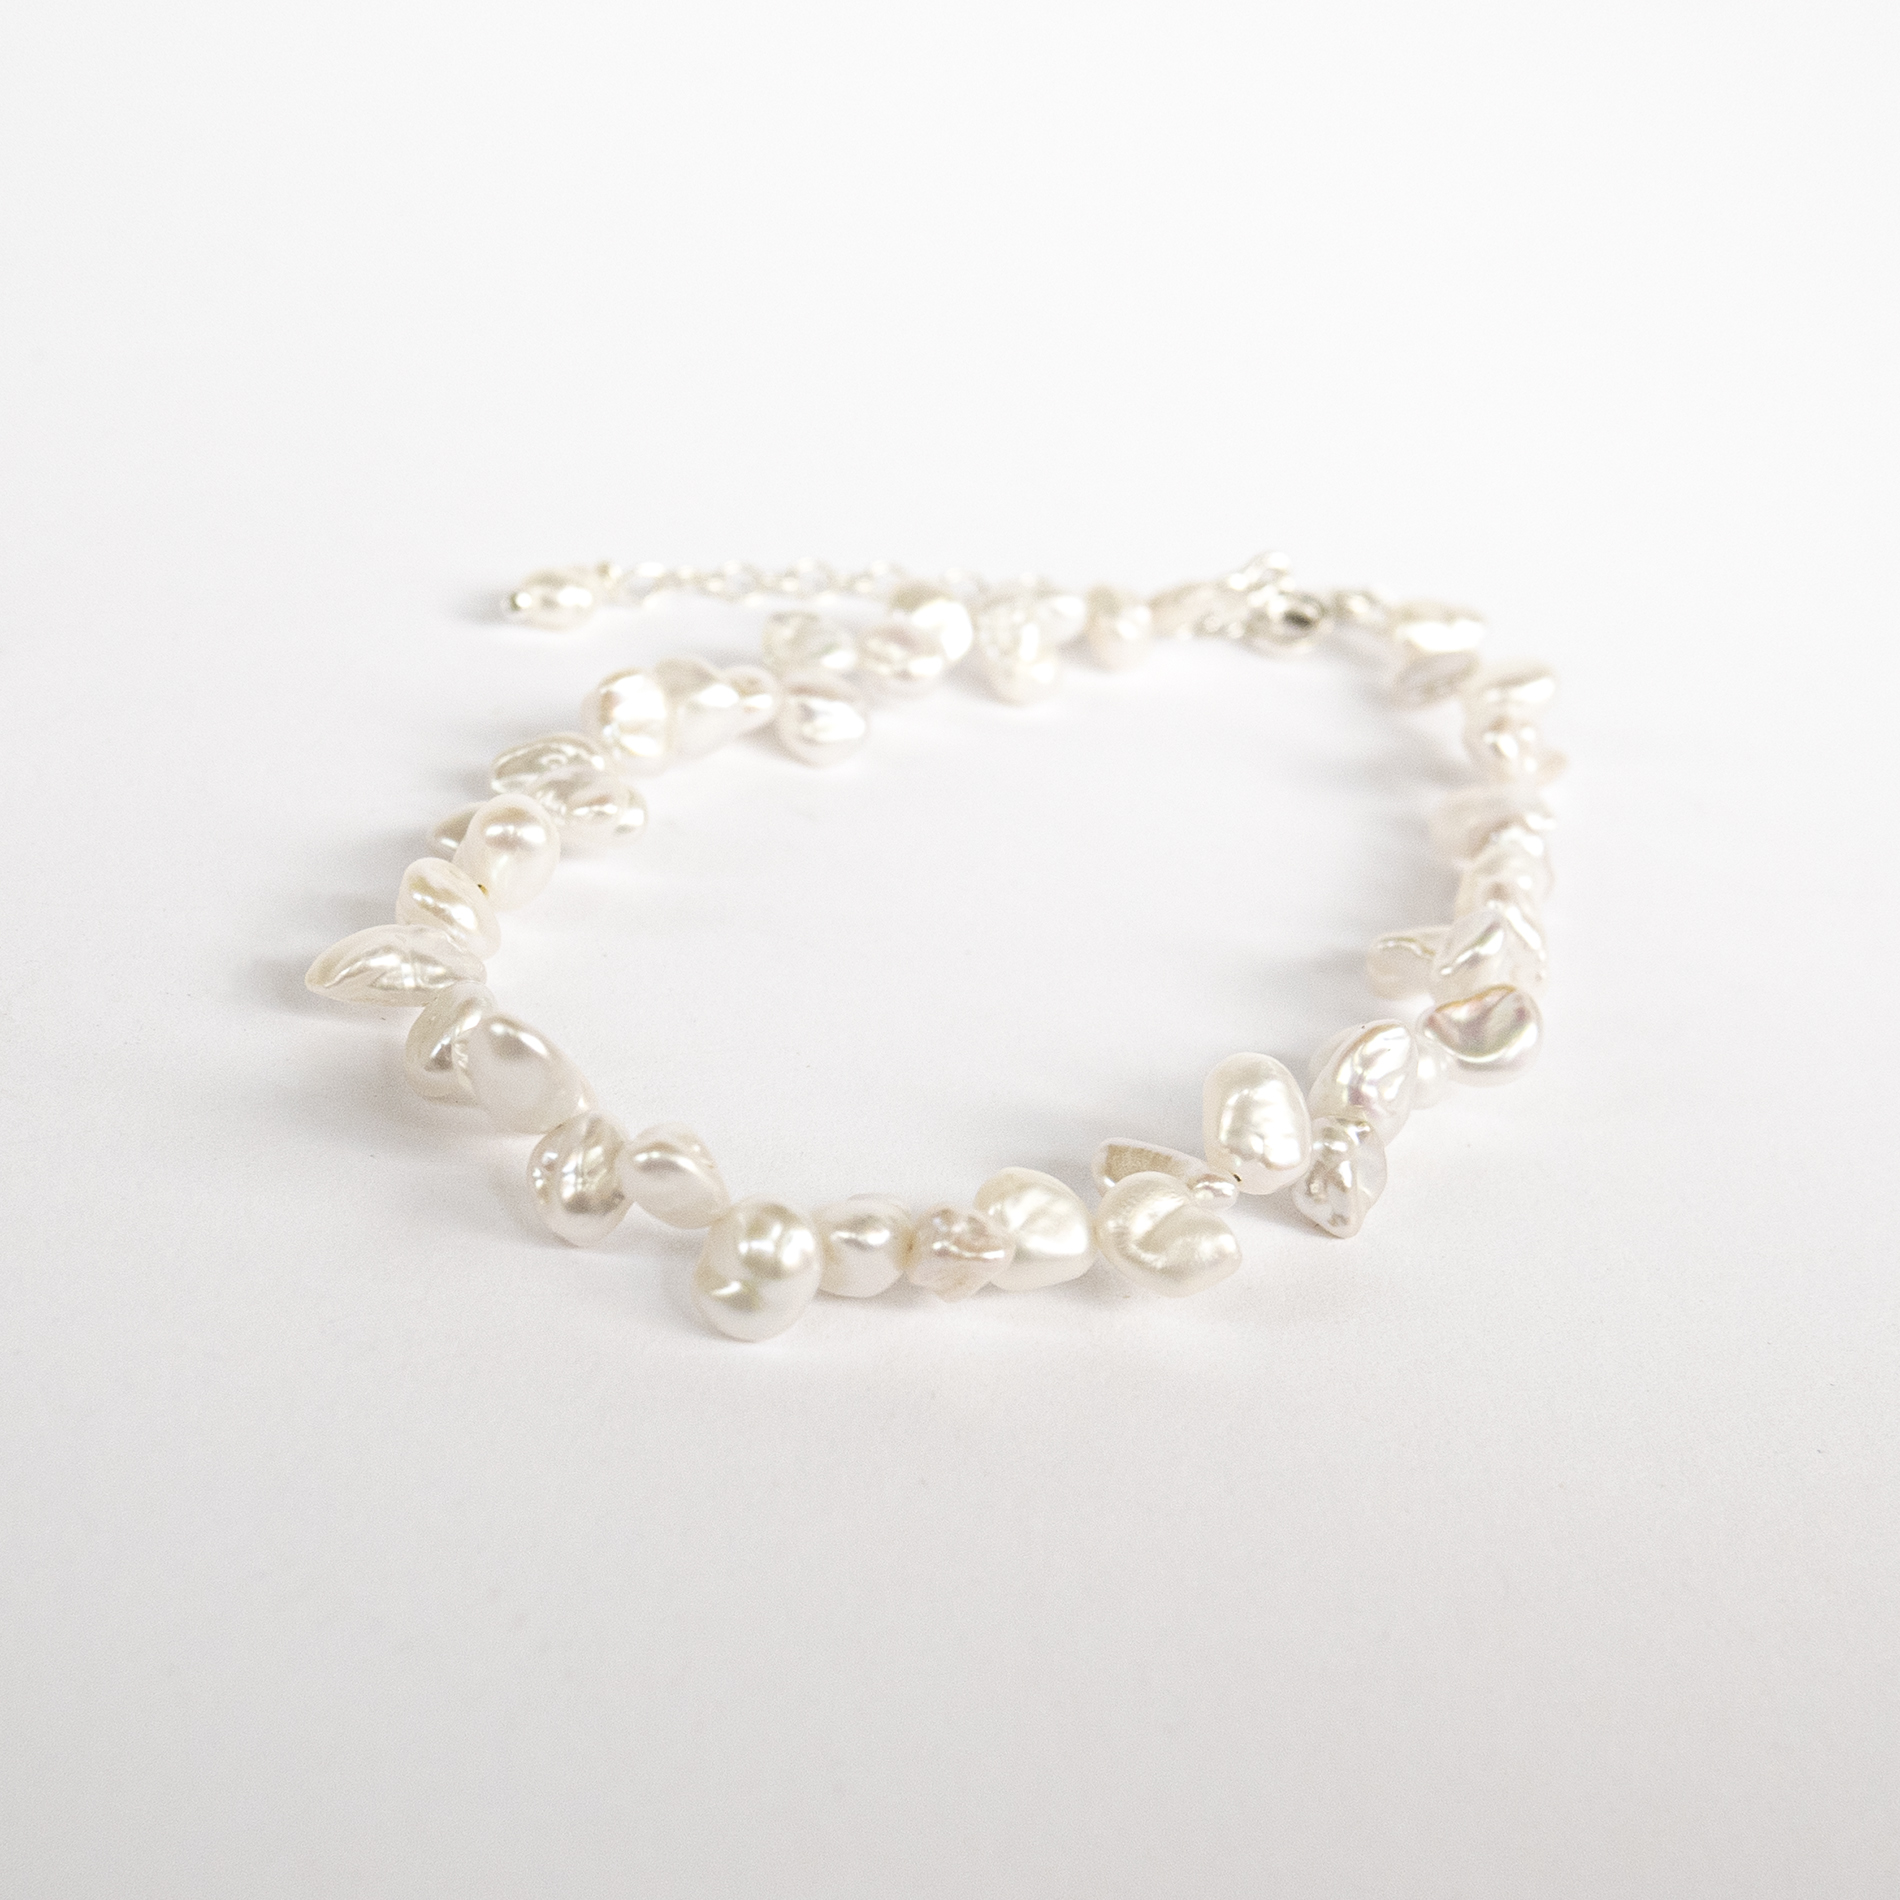 Anklet bracelet with baroque fresh water pearls.